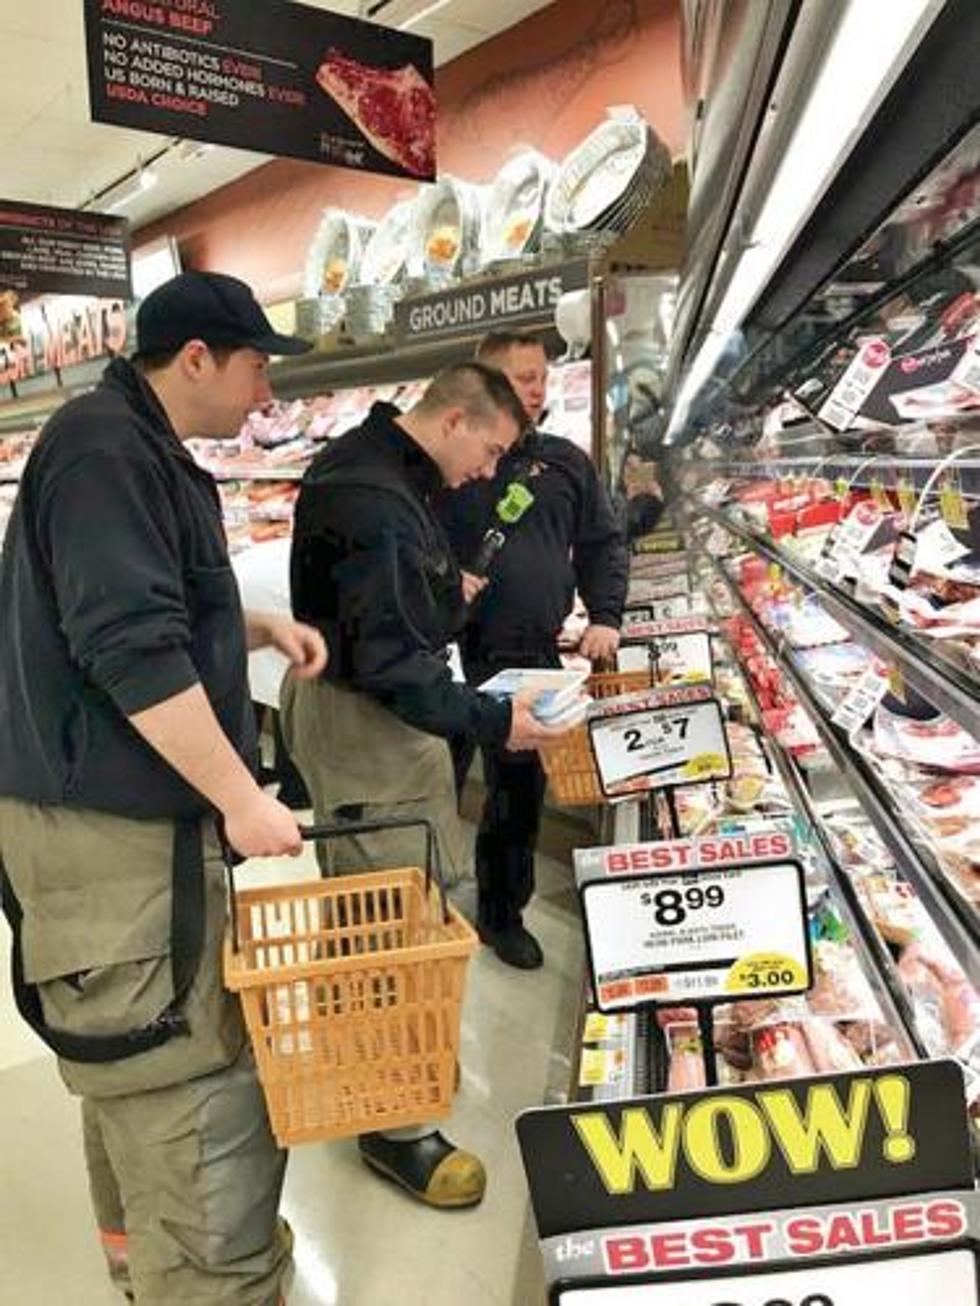 Why Do Massachusetts Firefighters Grocery Shop On Duty?